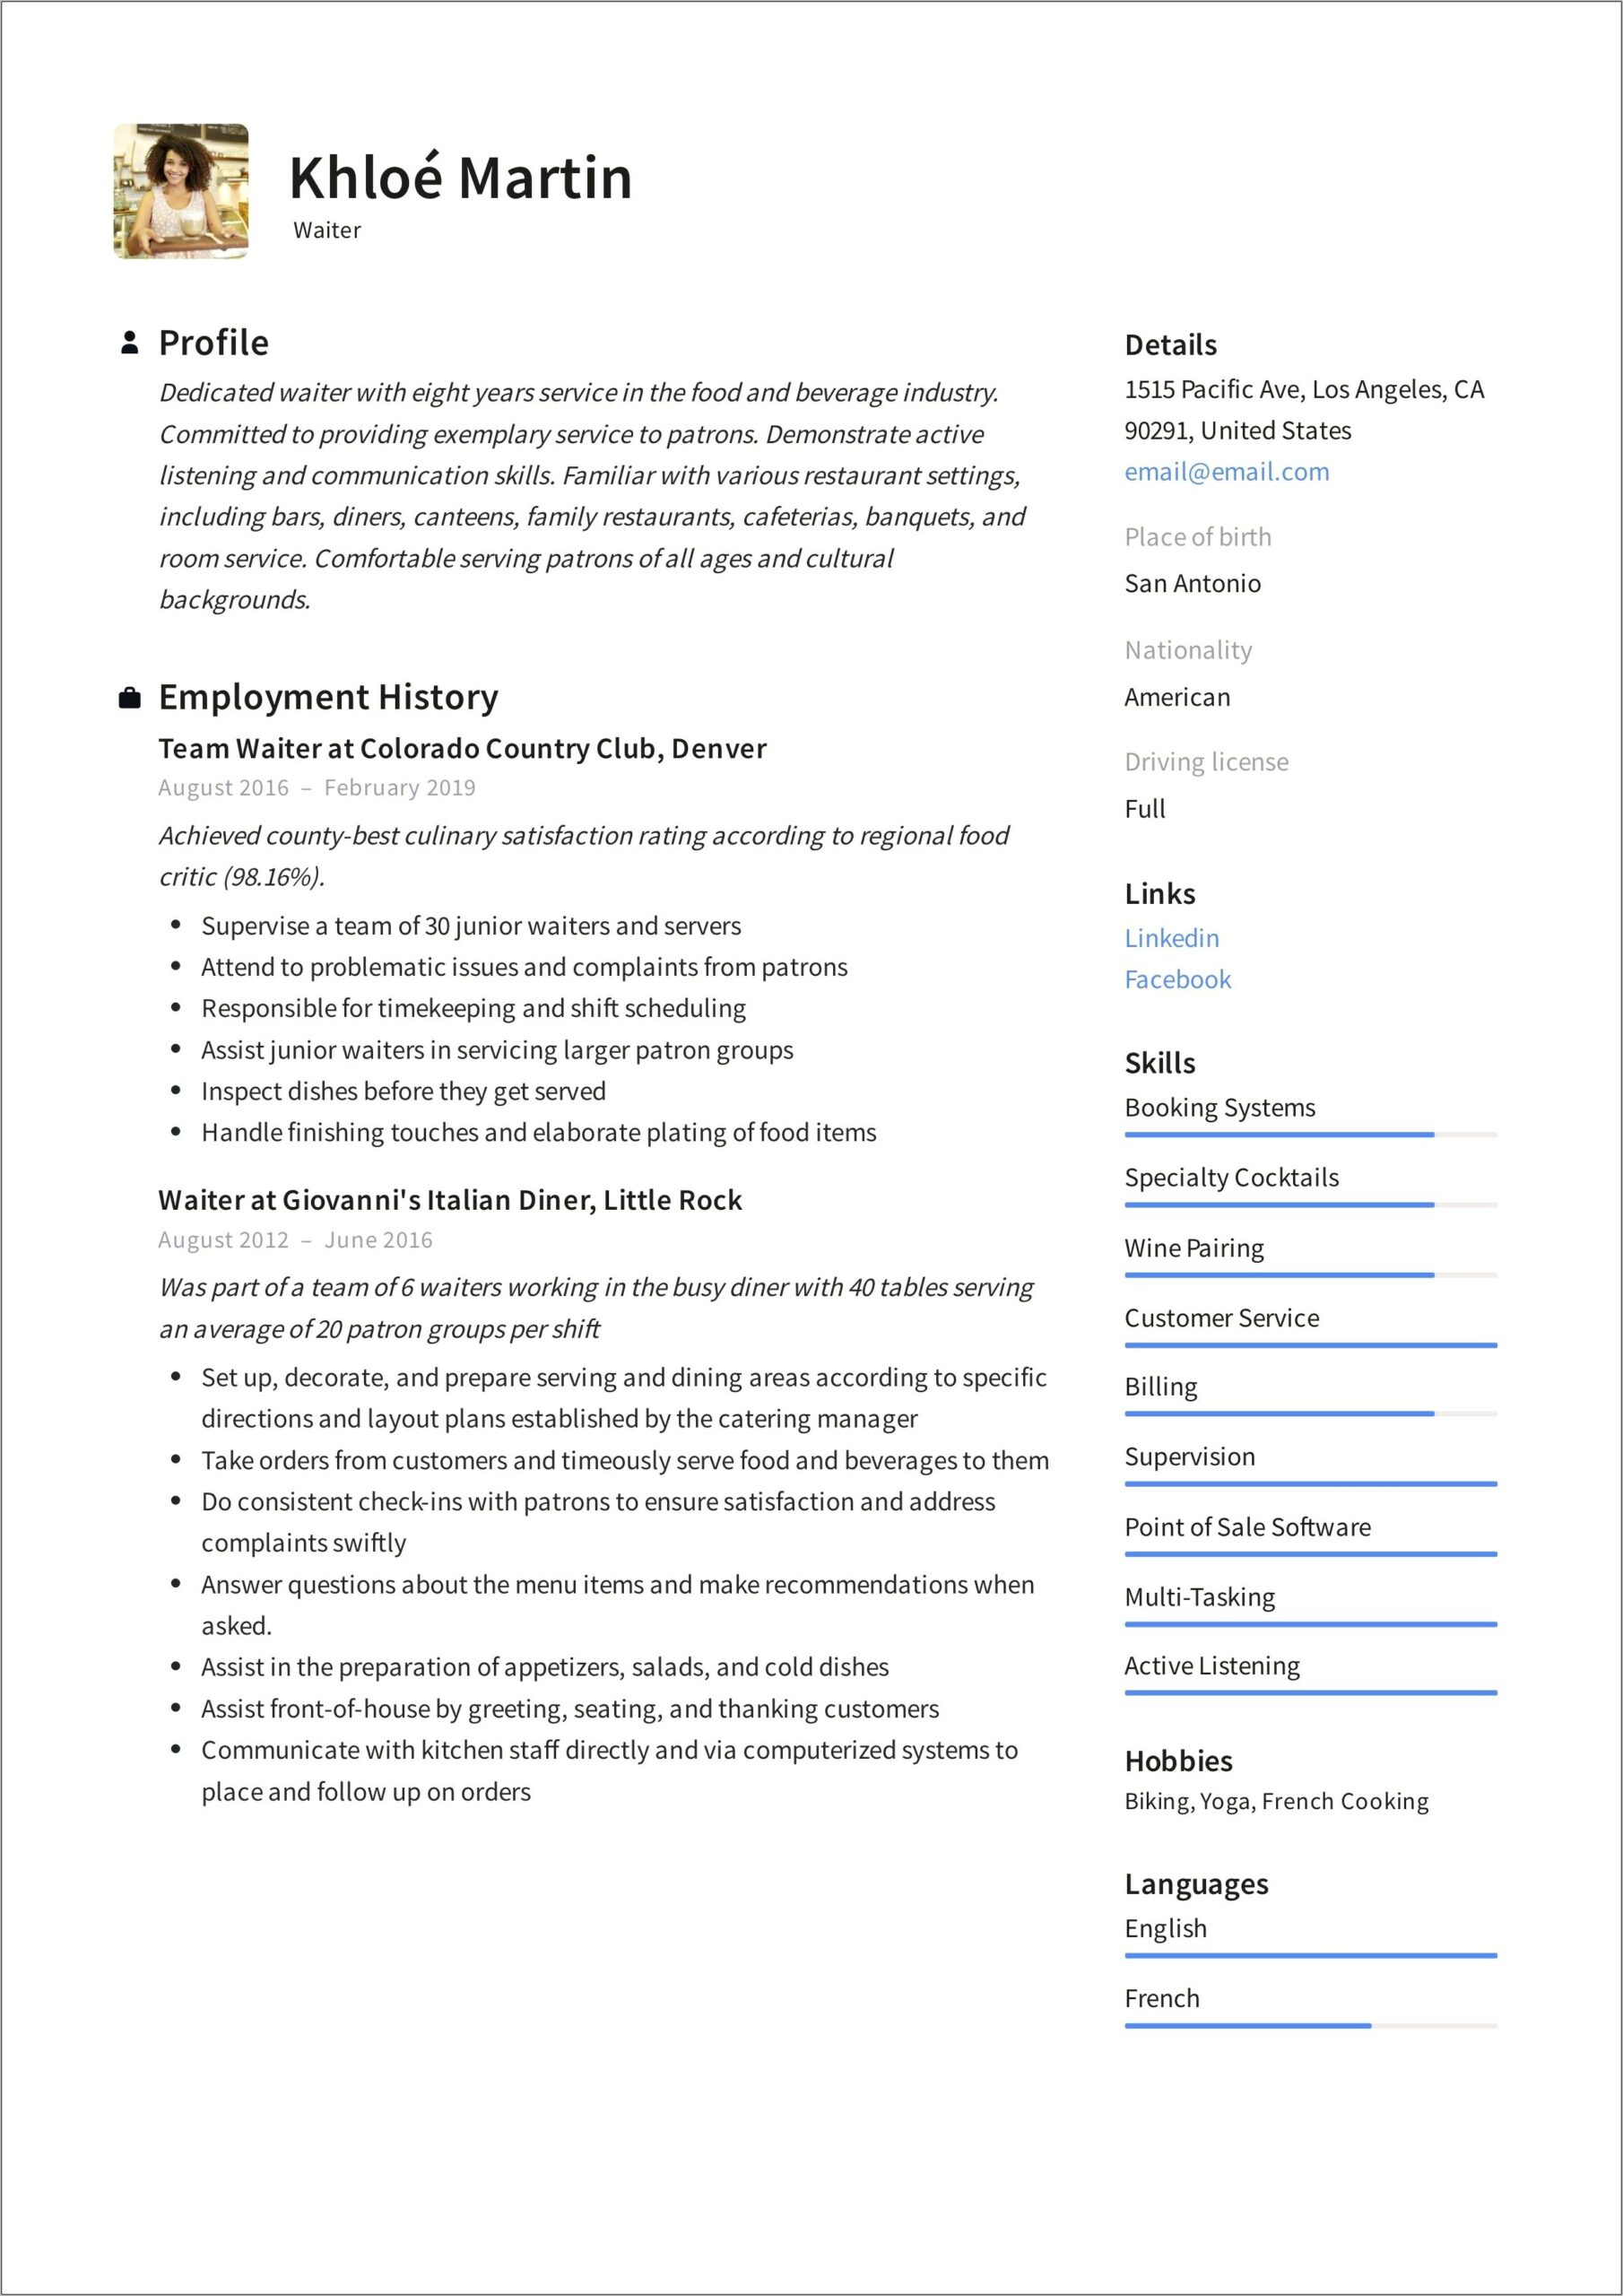 Resume Objective Statement Examples Waitress